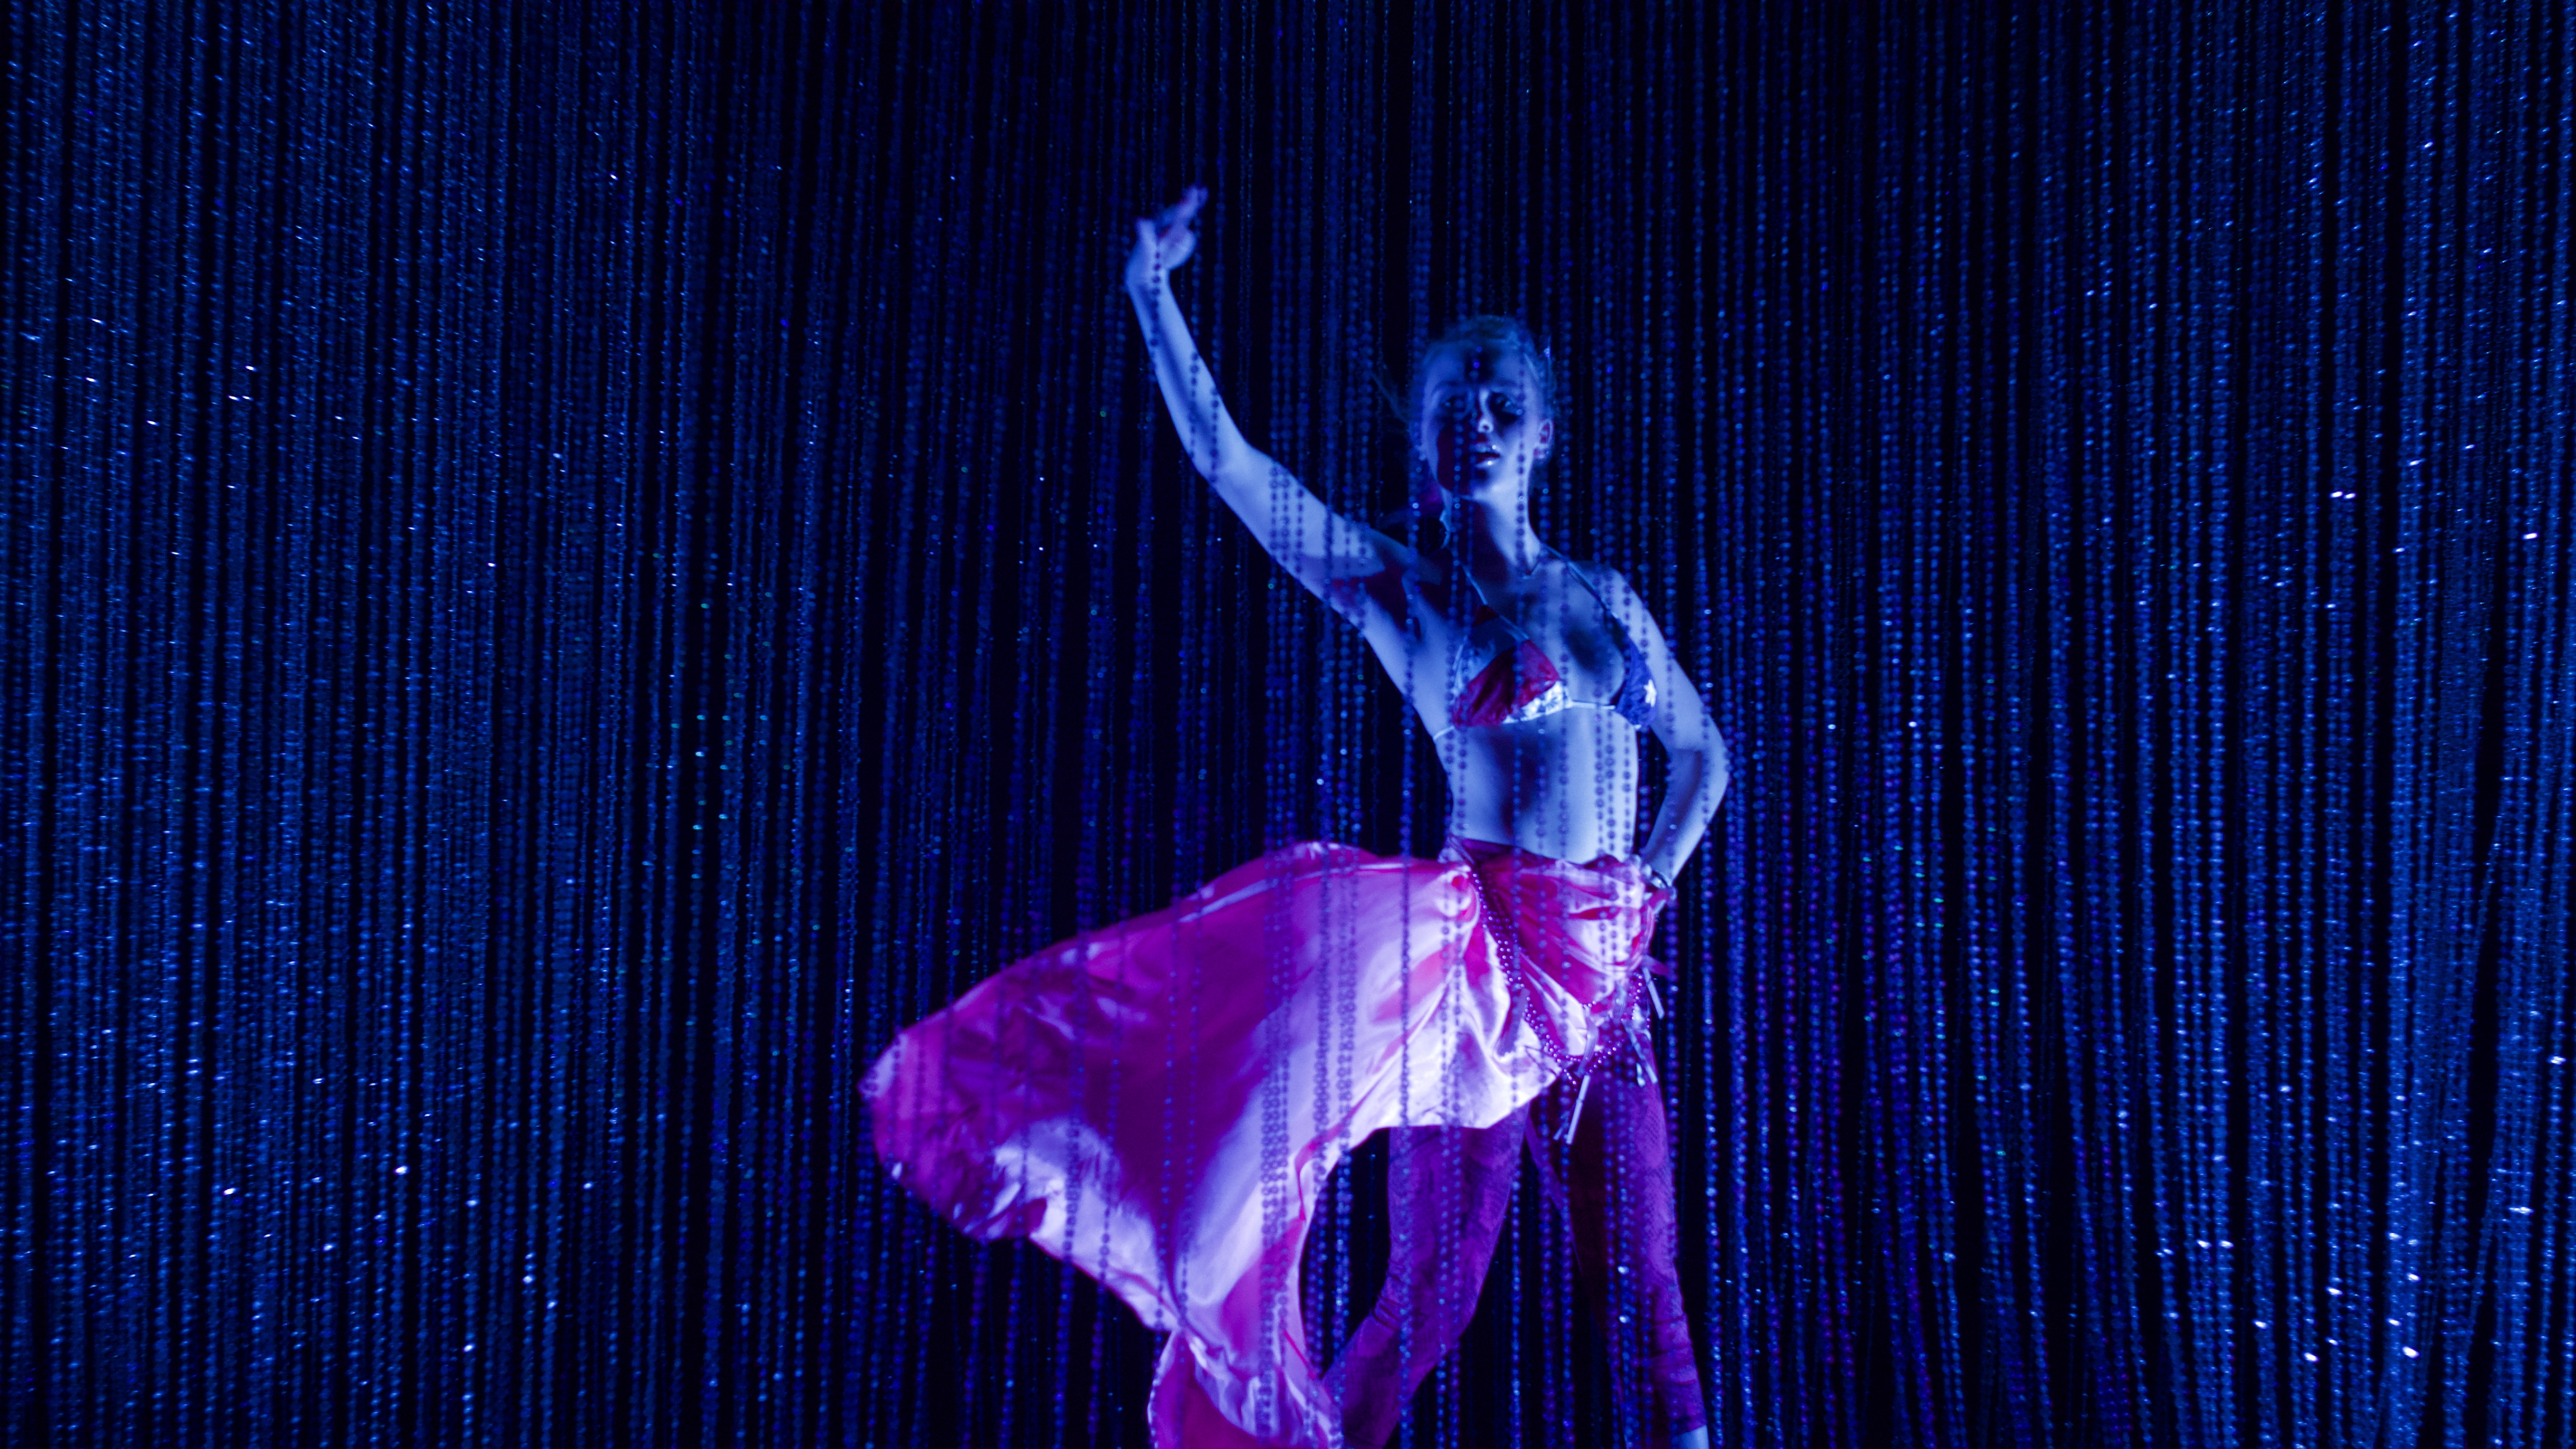 A photo of a woman wearing a mermaid costume behind a blue bead curtain